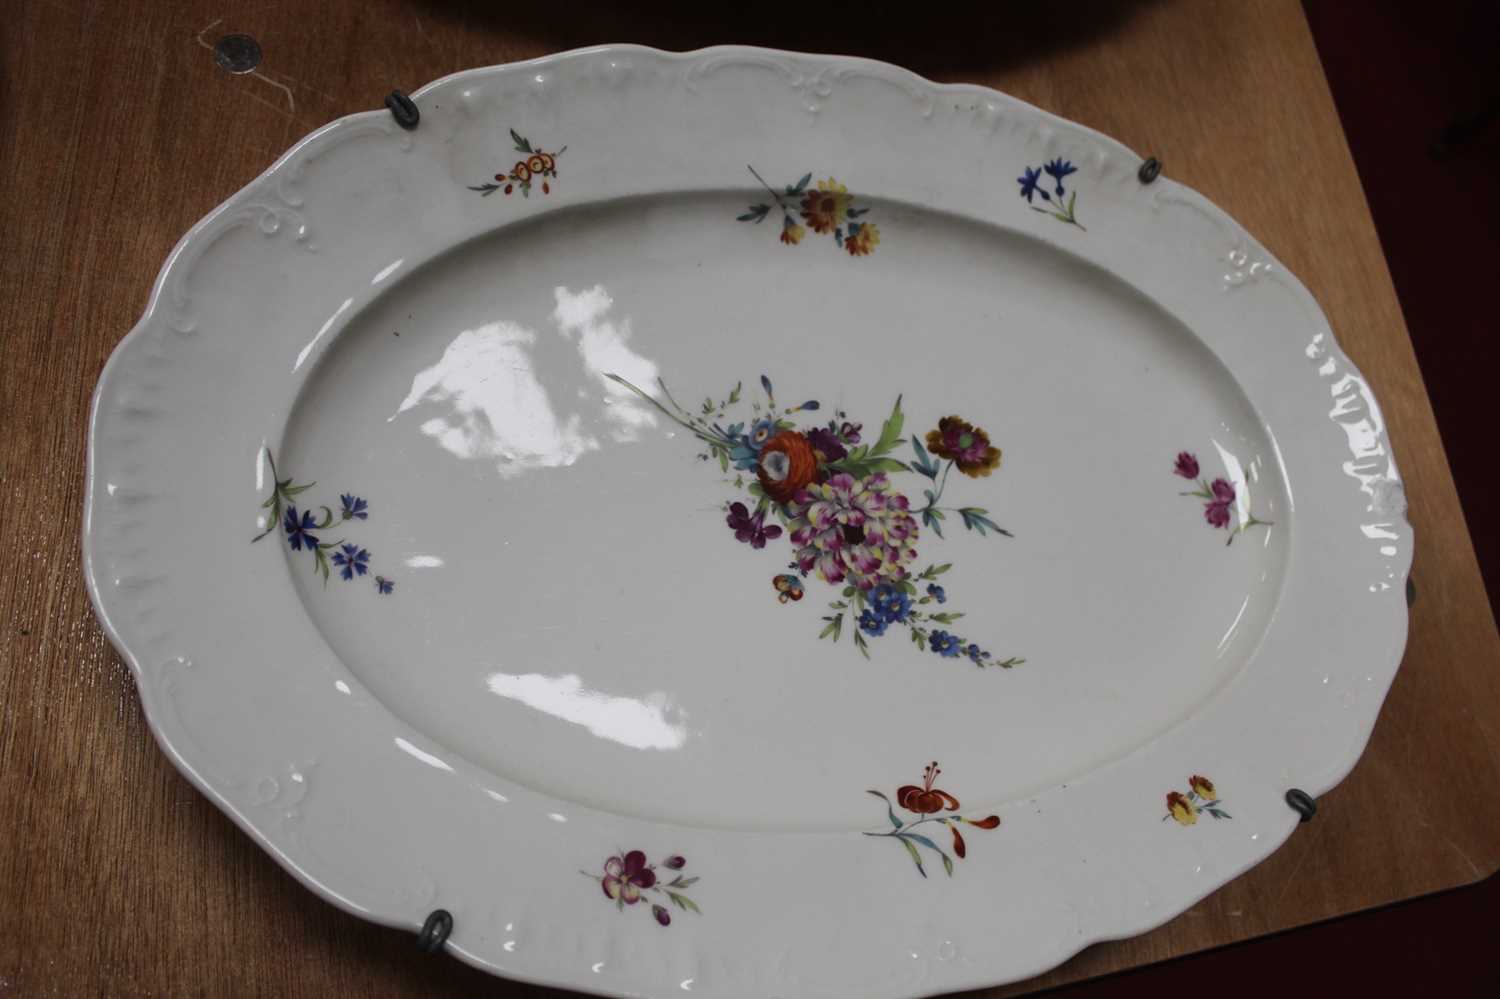 Two late 18th/early 19th century Dutch Loosdrecht or Amstel porcelain meat dishes, each decorated - Image 6 of 6